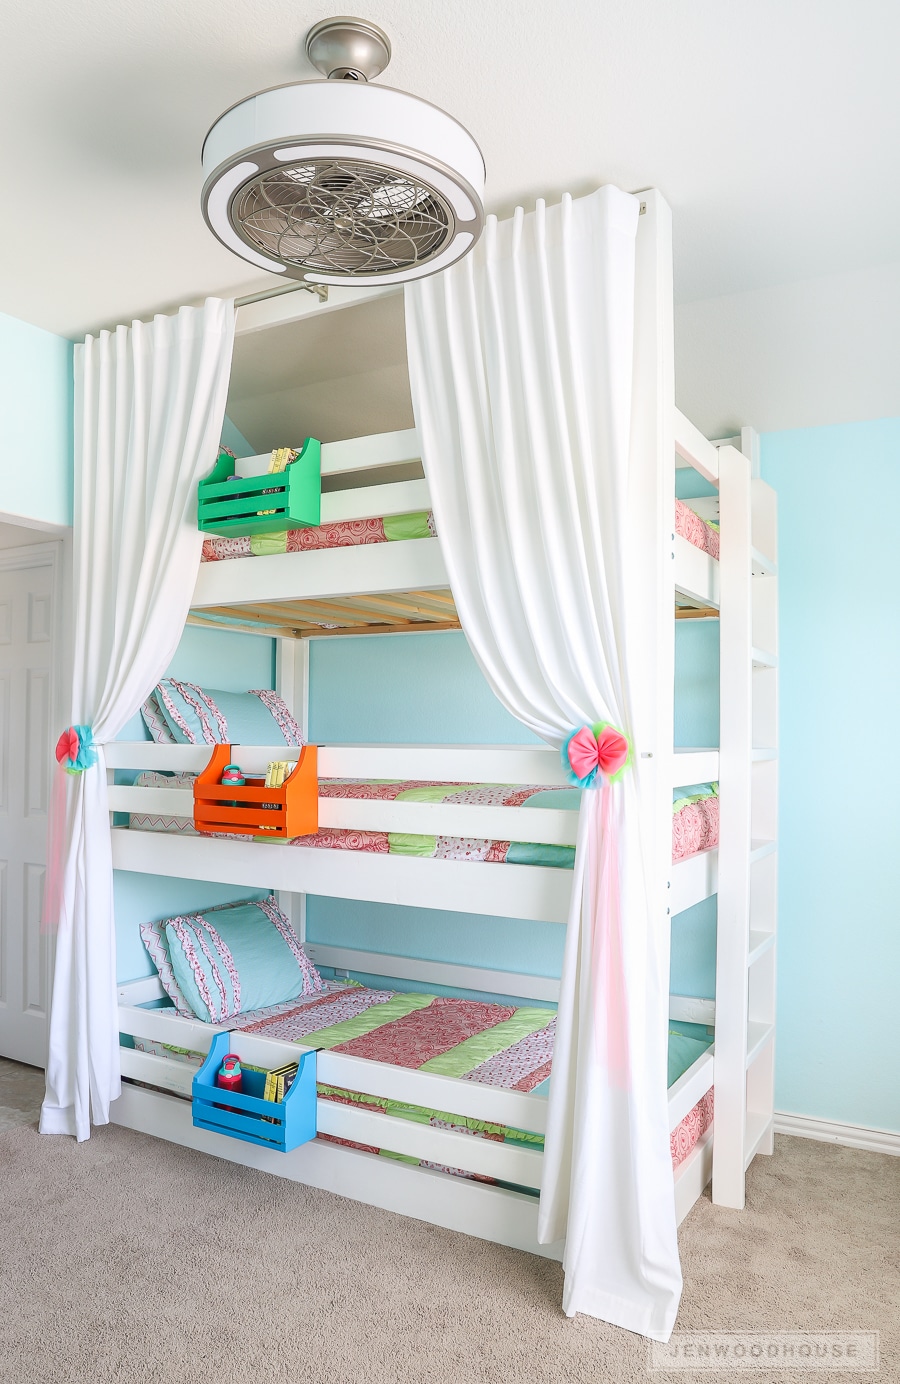 How To Build A Diy Triple Bunk Bed, How Much Do Custom Bunk Beds Cost